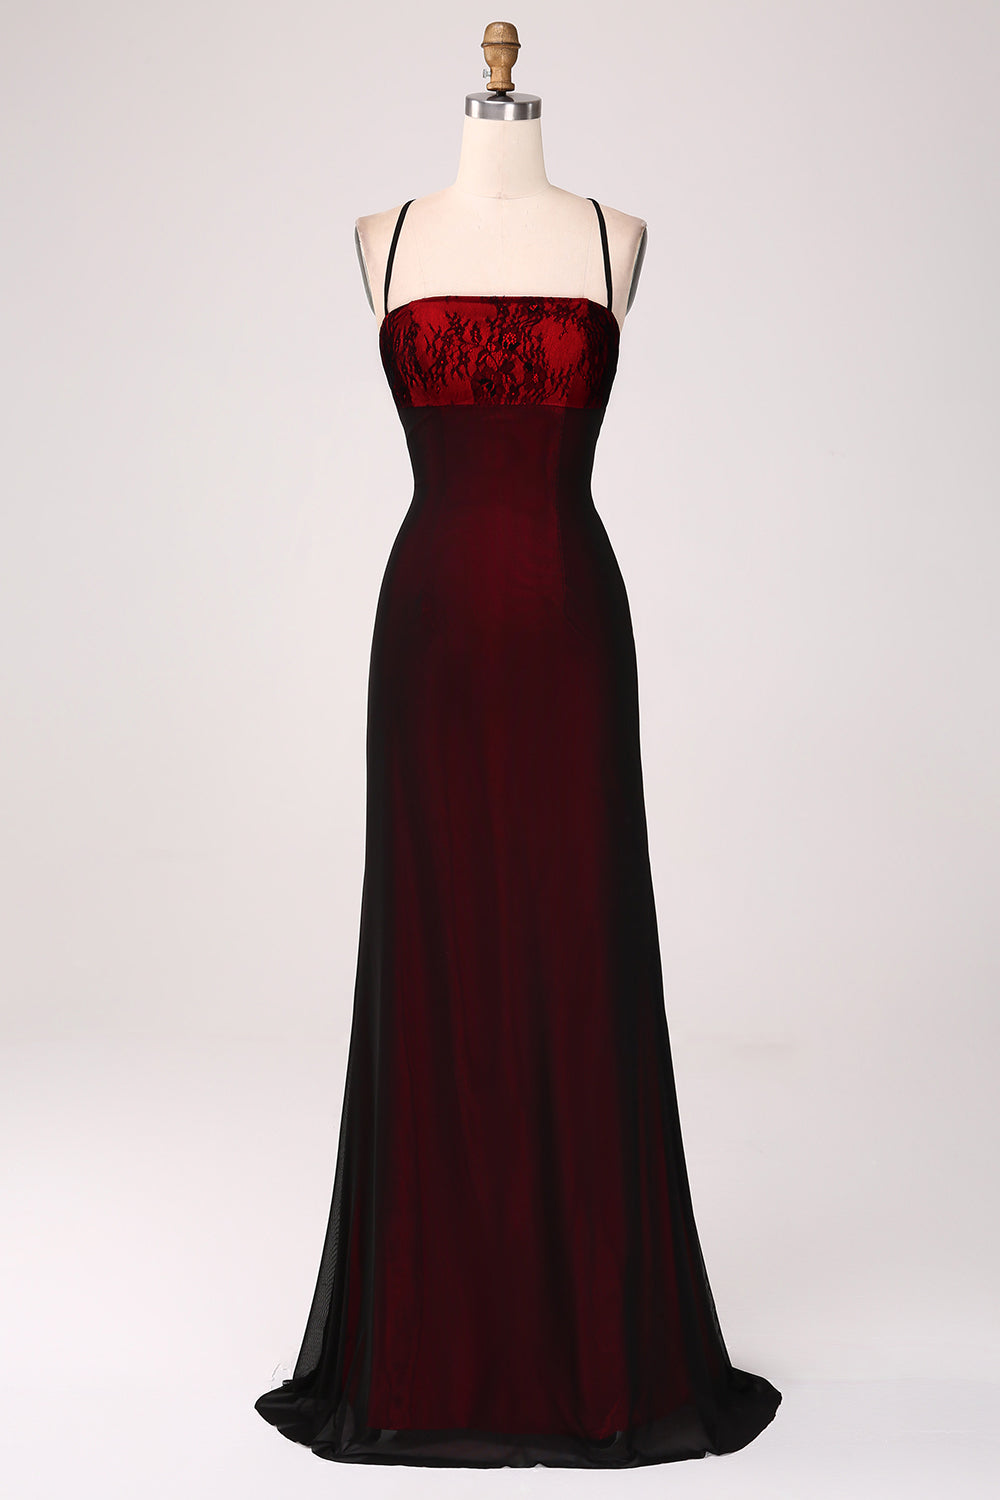 Black Red Sheath Bridesmaid Dress with Lace-up Back